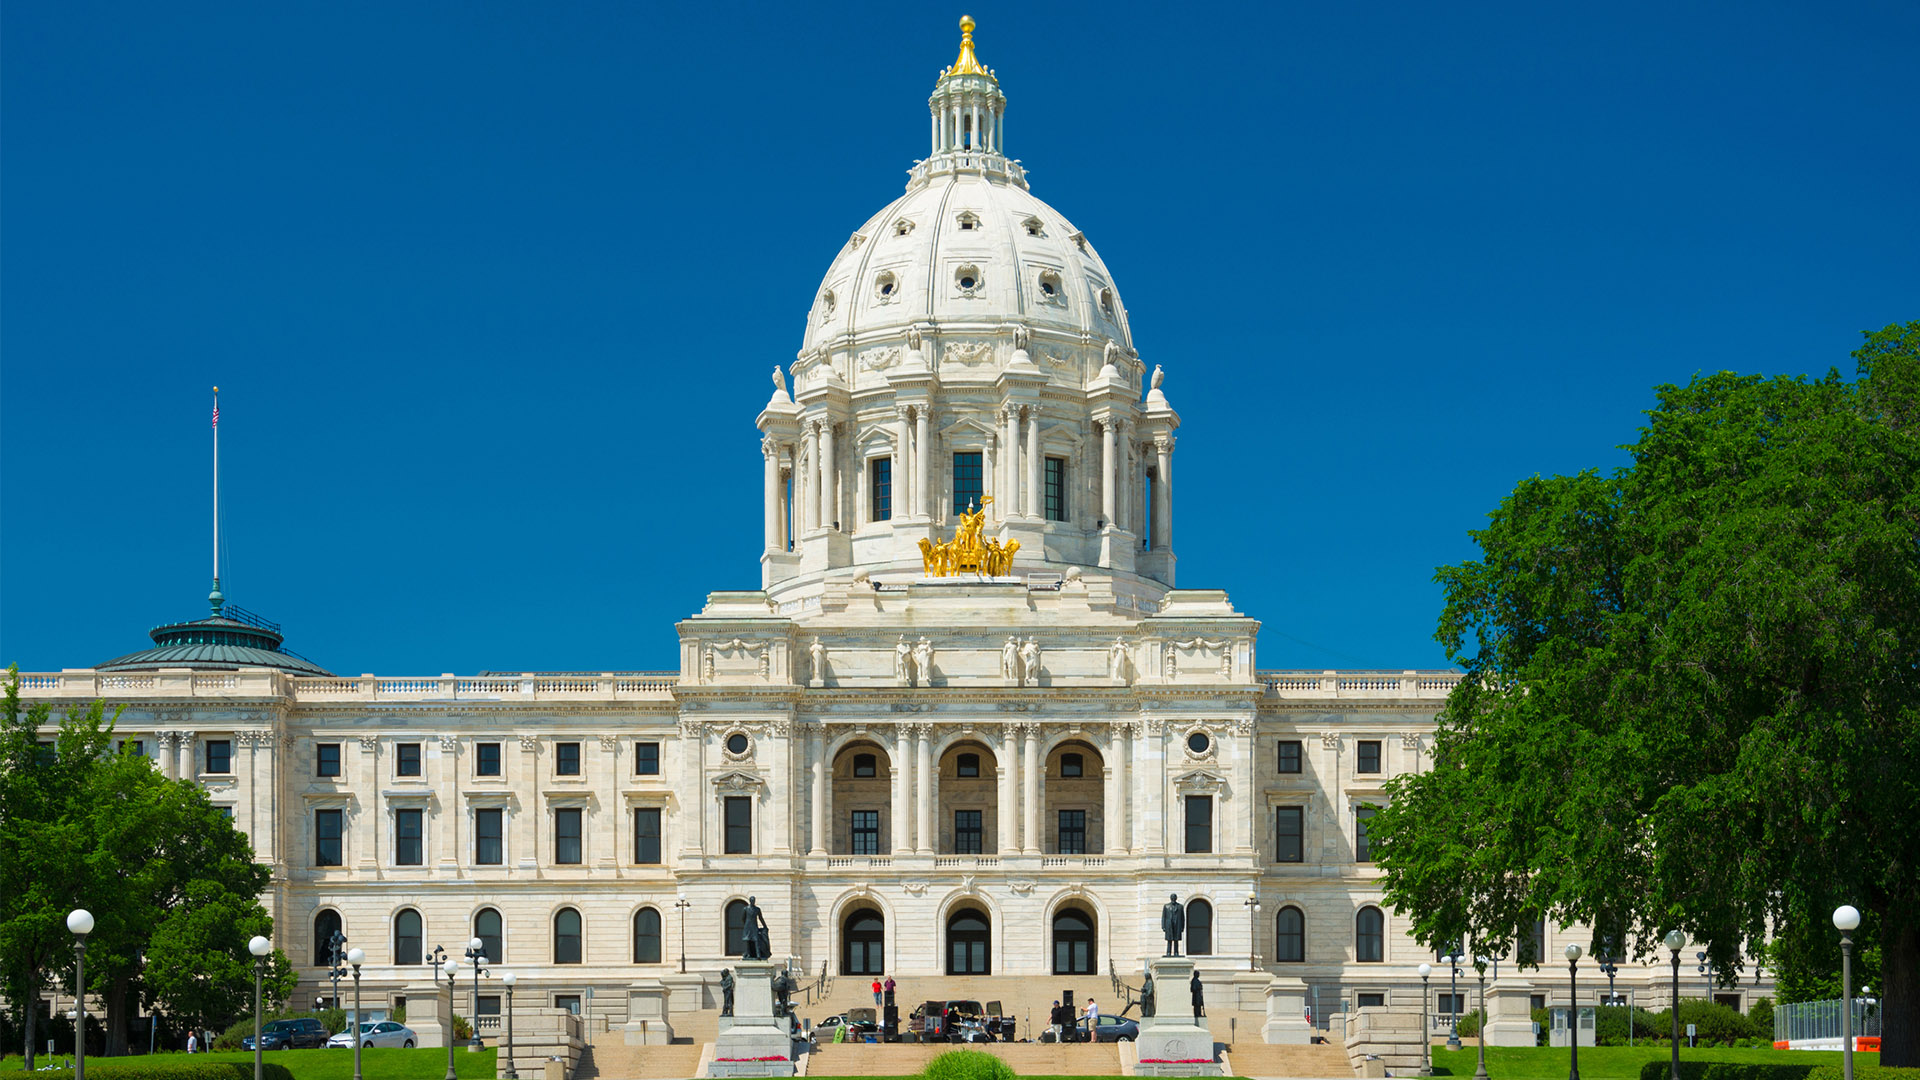 The Minnesota State Capitol on a sunny day in summer